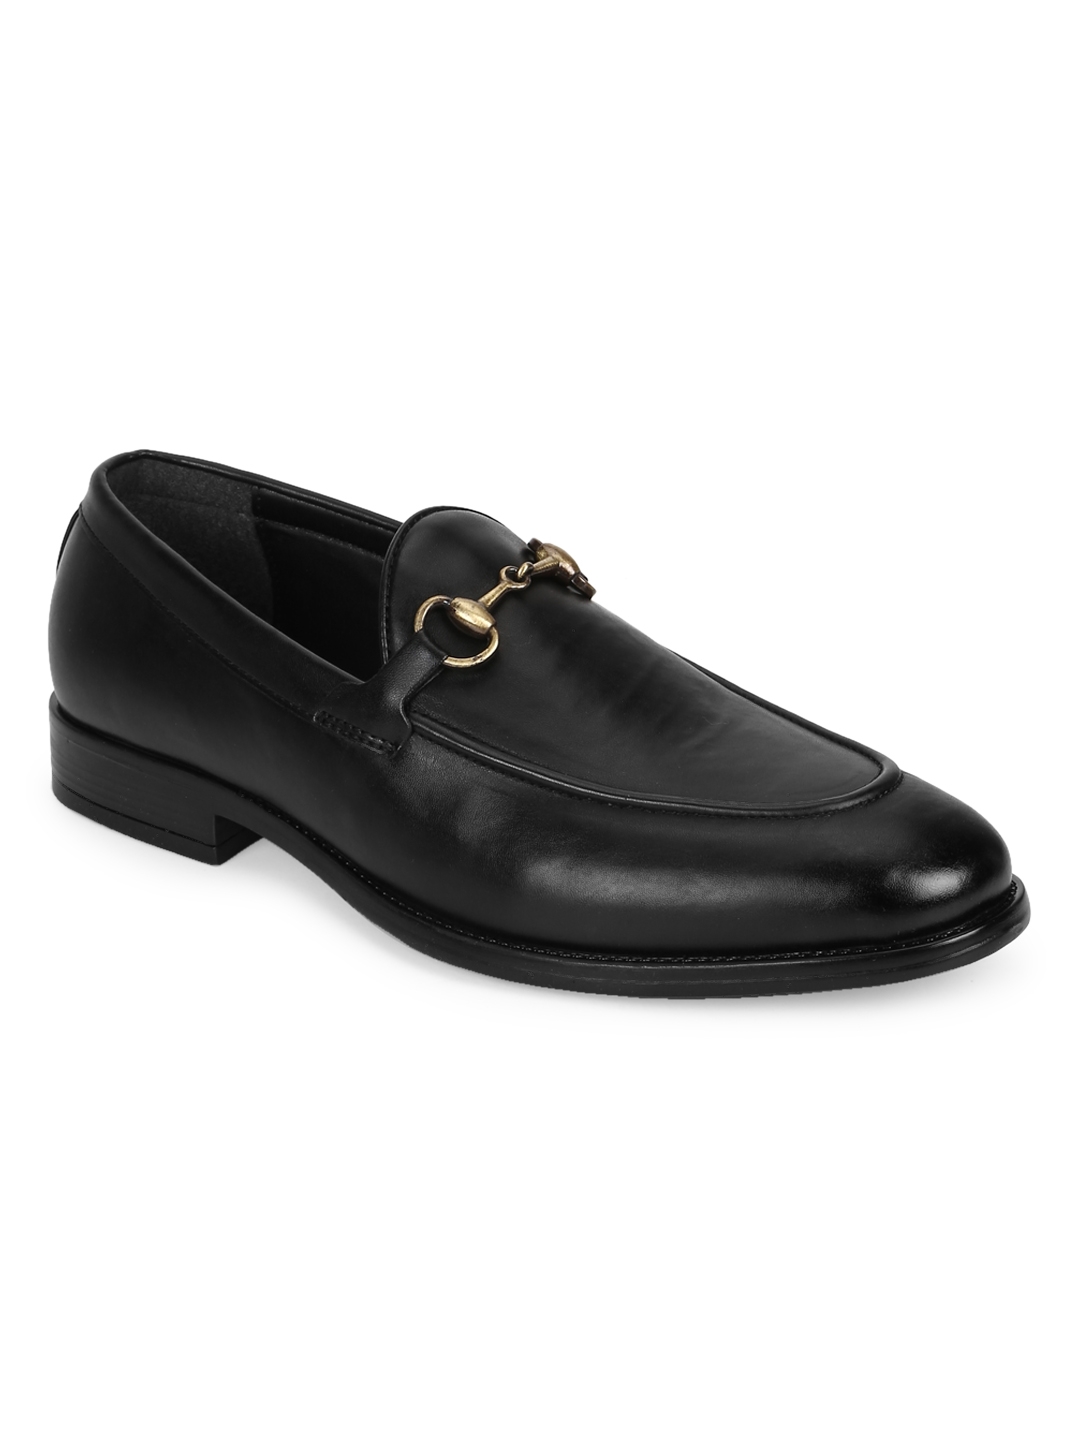 Black PU Men's Low Heel Chained Loafers